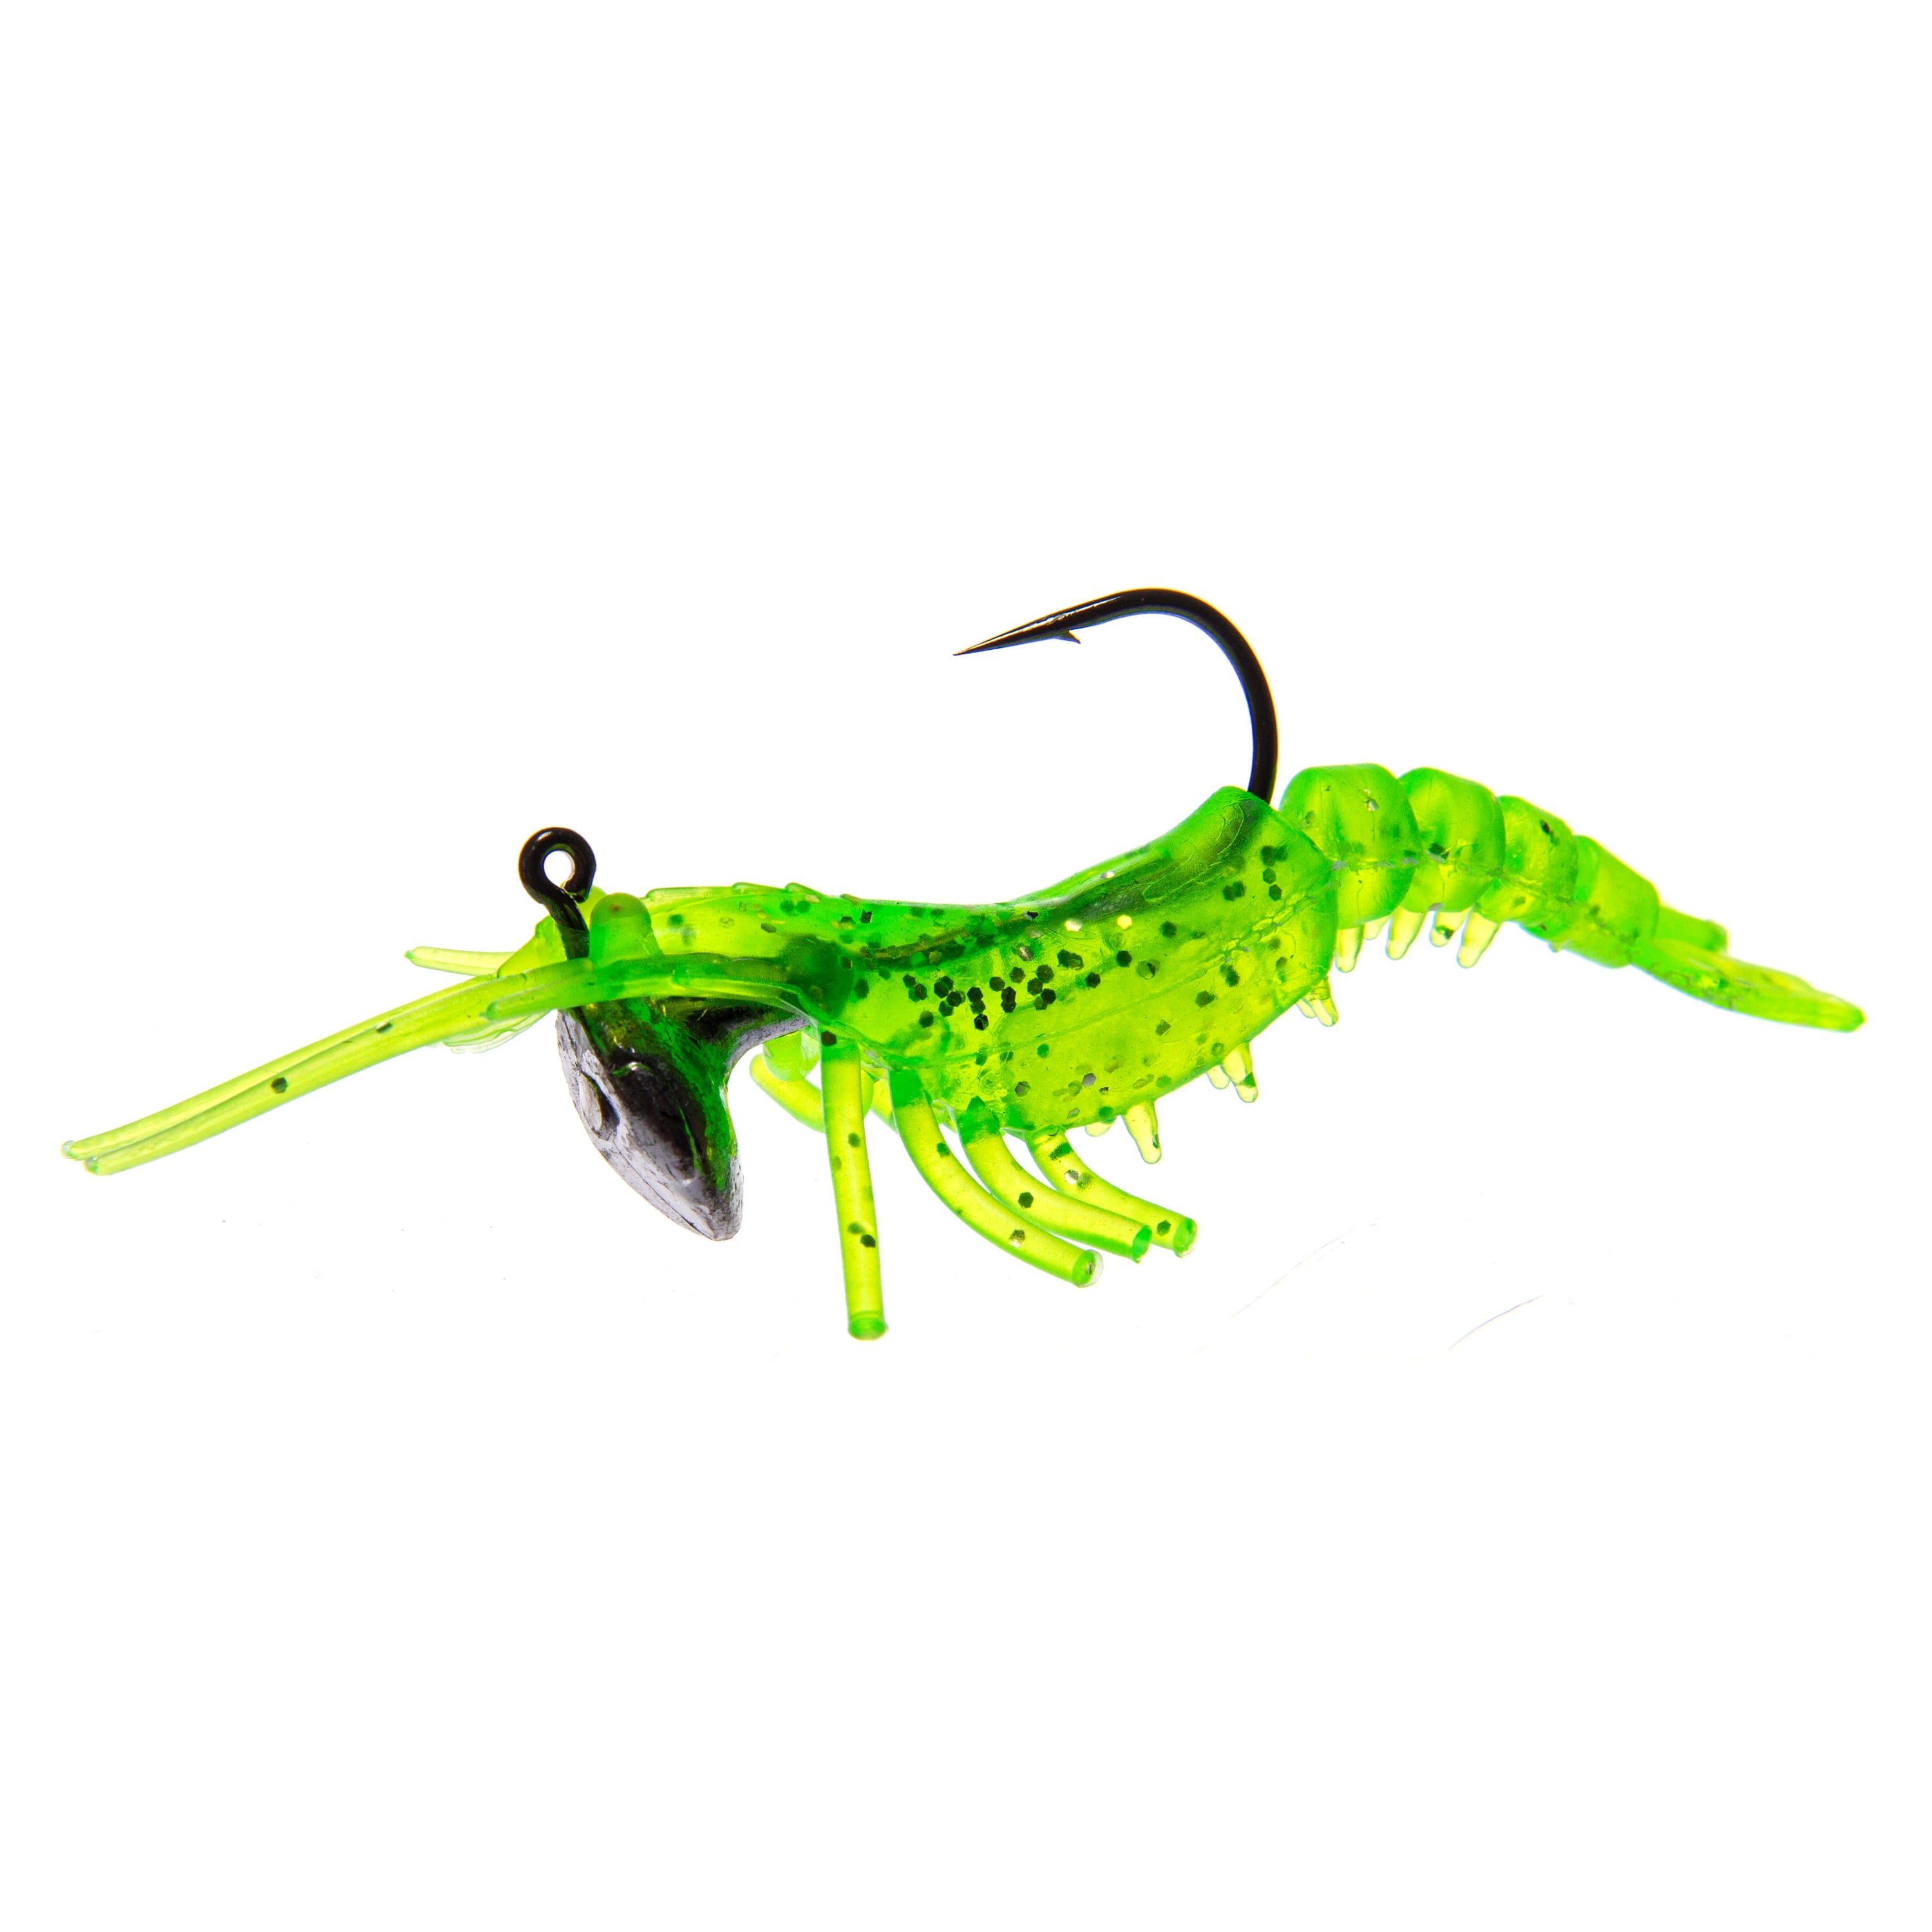 Ozark Trails Soft Plastic Saltwater Shrimp Bait Fishing Lures, 2-pack. In  fish attracting colors. 